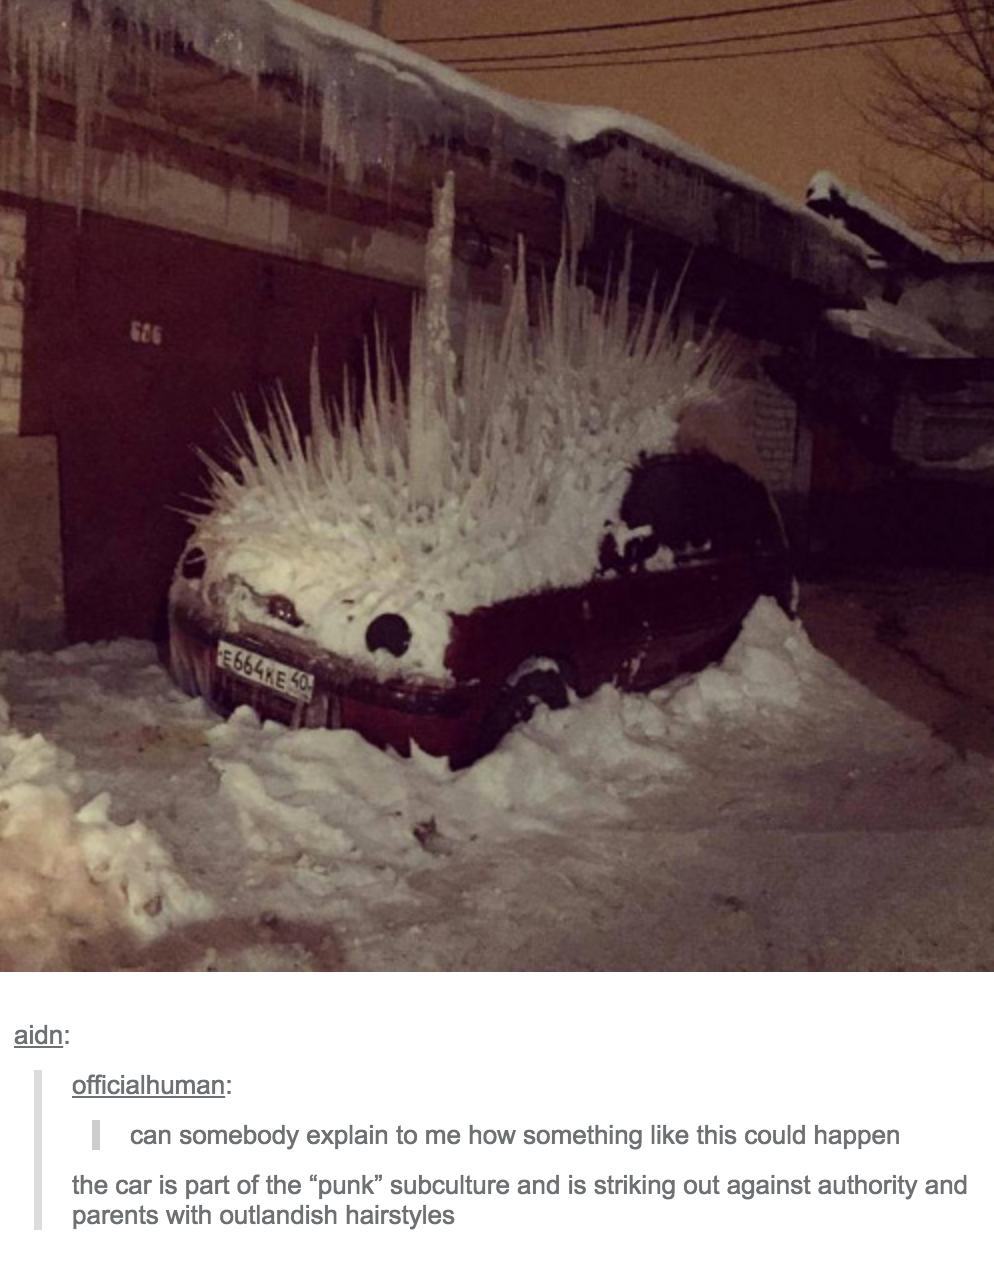 tumblr - punk tumblr posts - See F664 E 40 aidn officialhuman I can somebody explain to me how something this could happen the car is part of the punk" subculture and is striking out against authority and parents with outlandish hairstyles